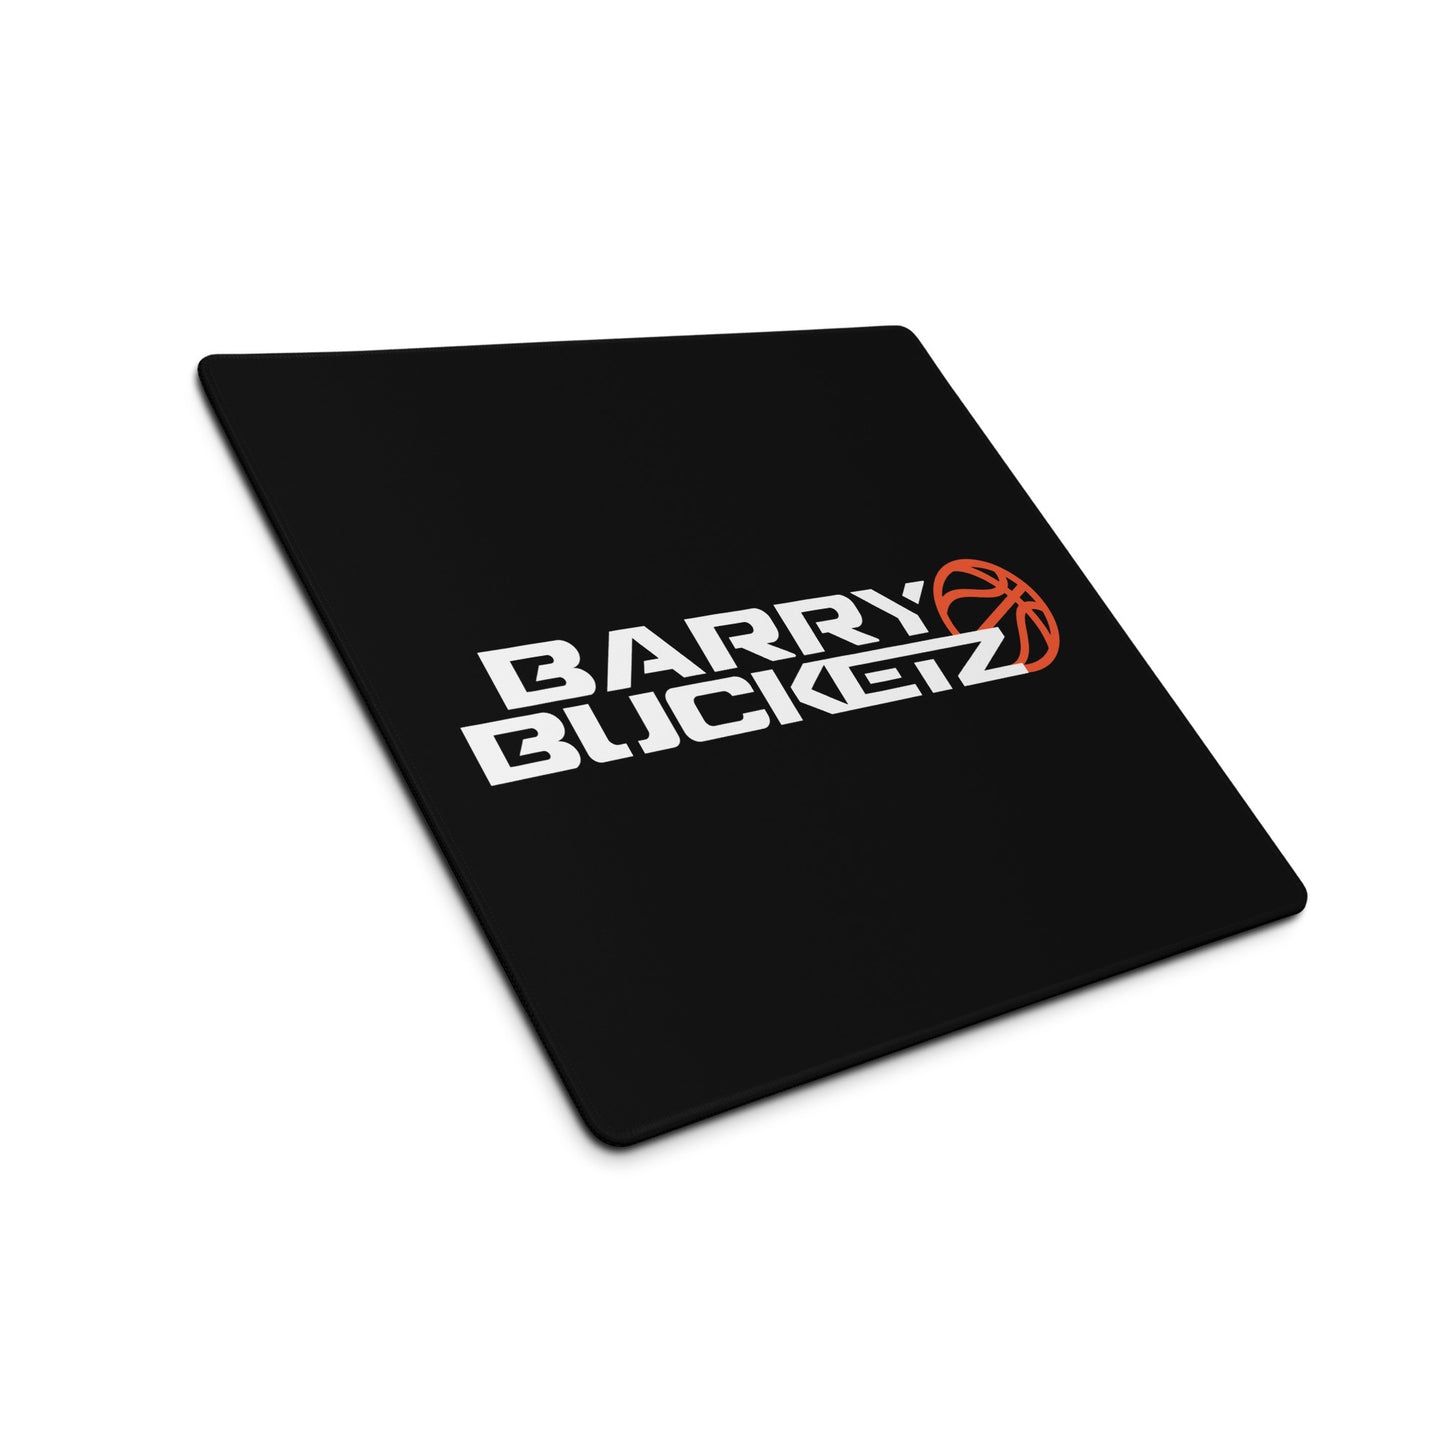 BARRY BUCKETZ MOUSE PAD